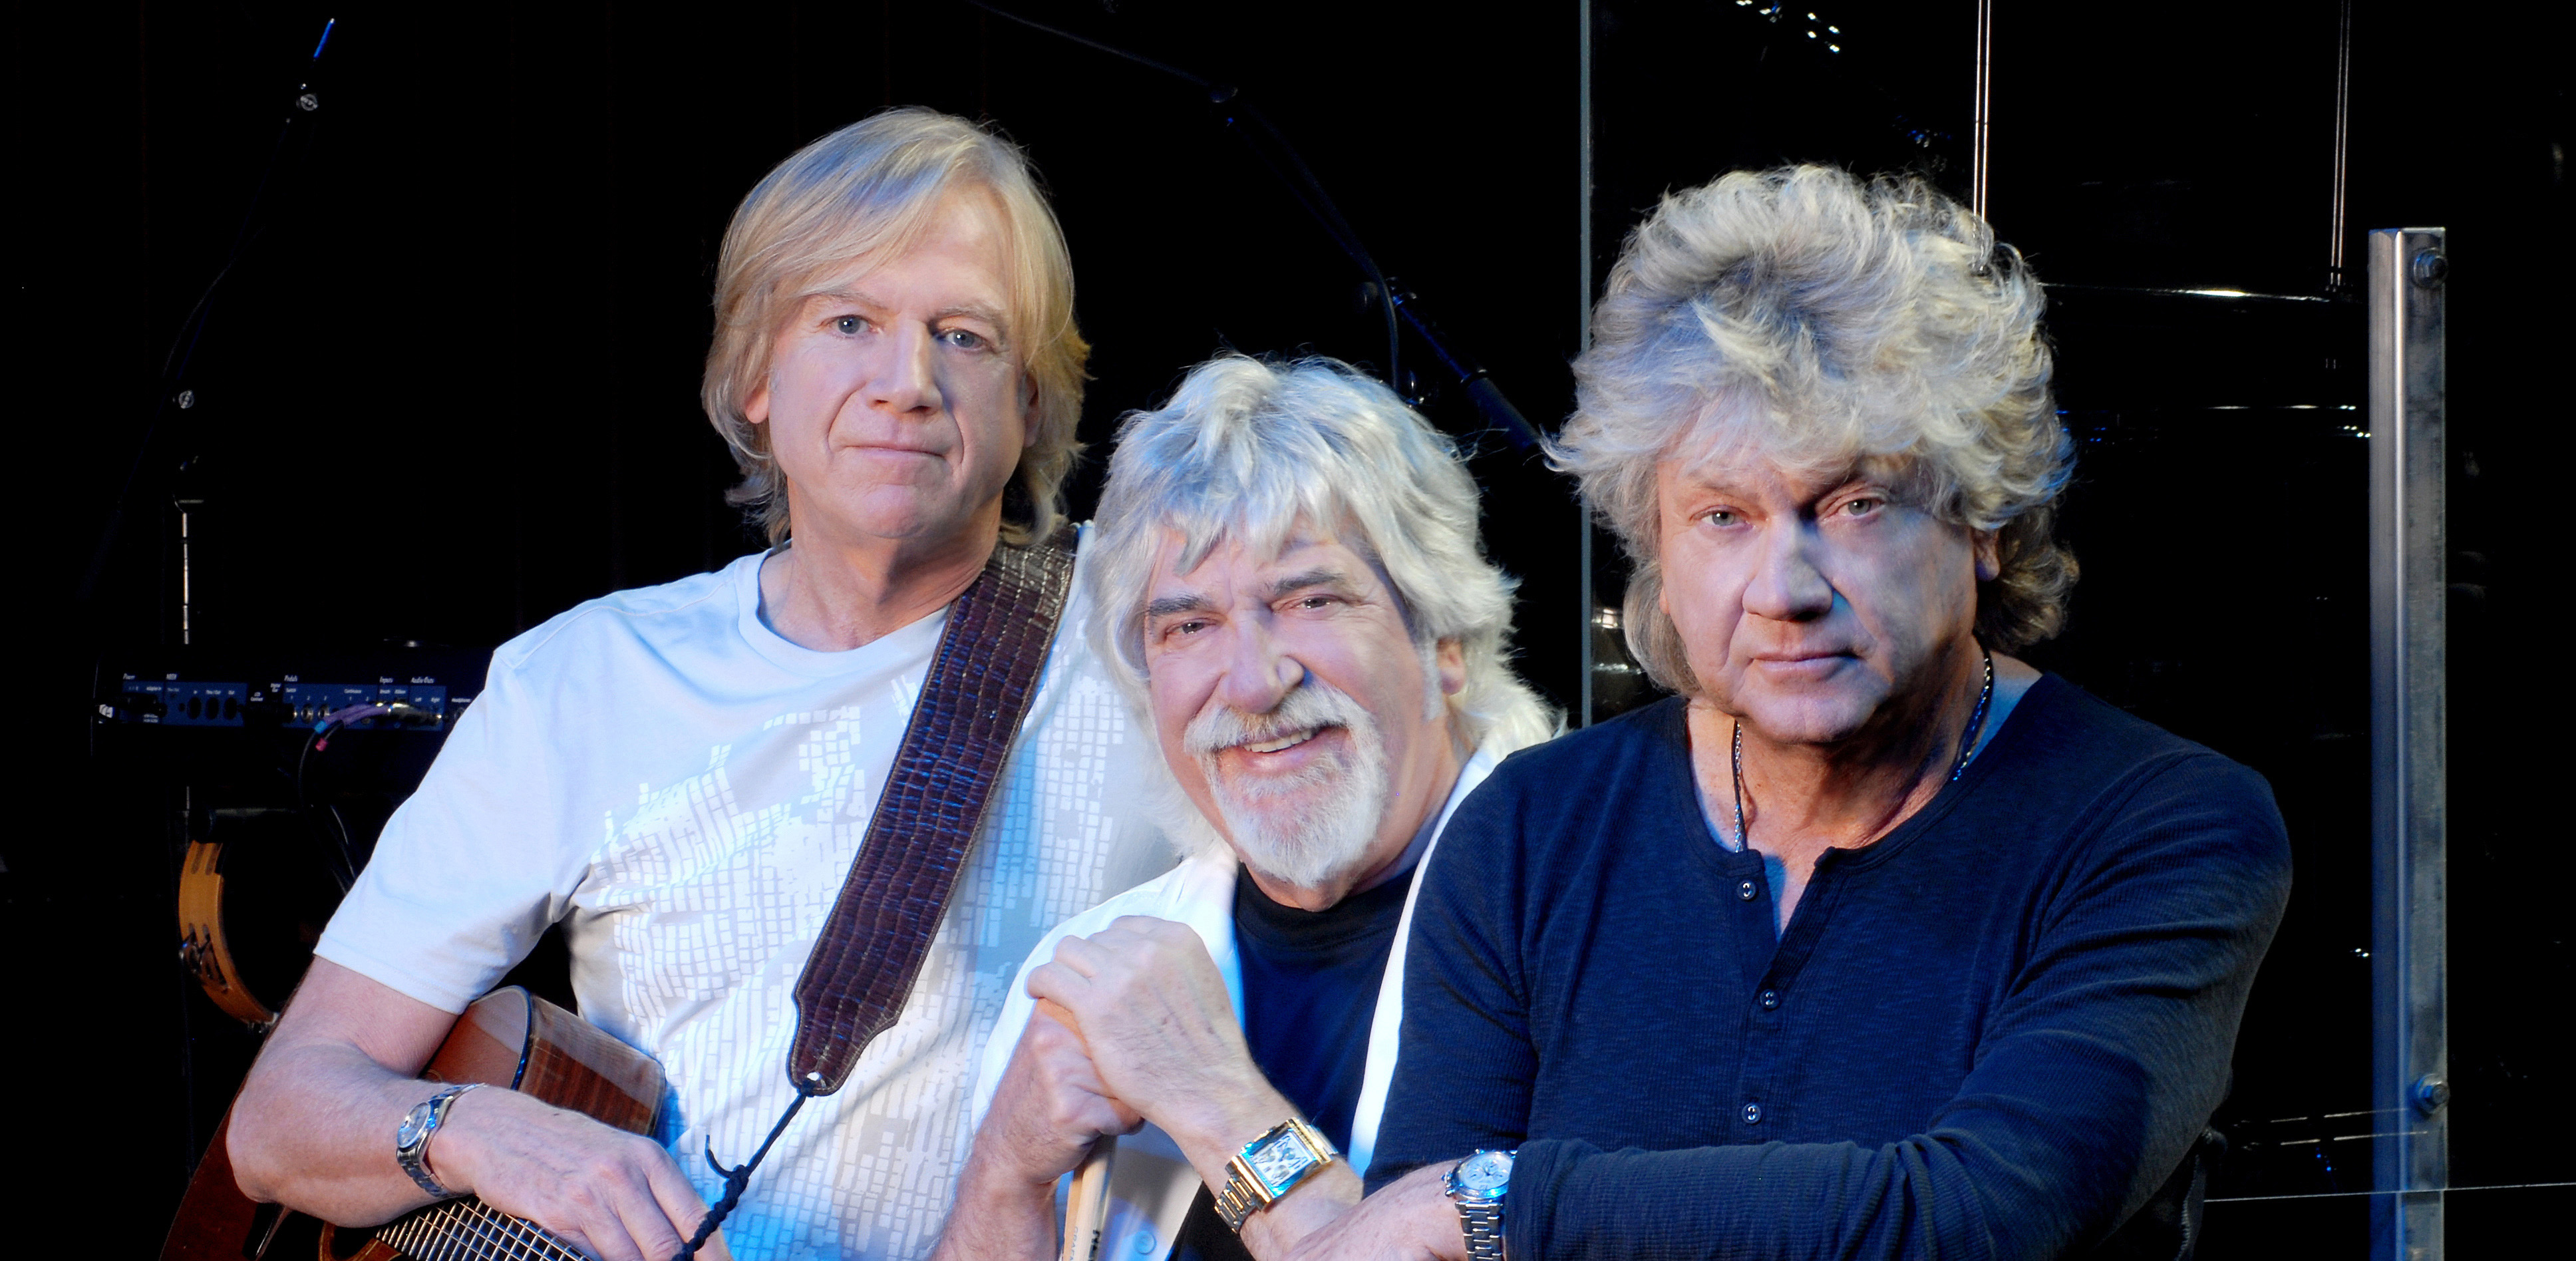 rock-legends-the-moody-blues-to-headline-wine-dvine-benefitting-walden-family-services